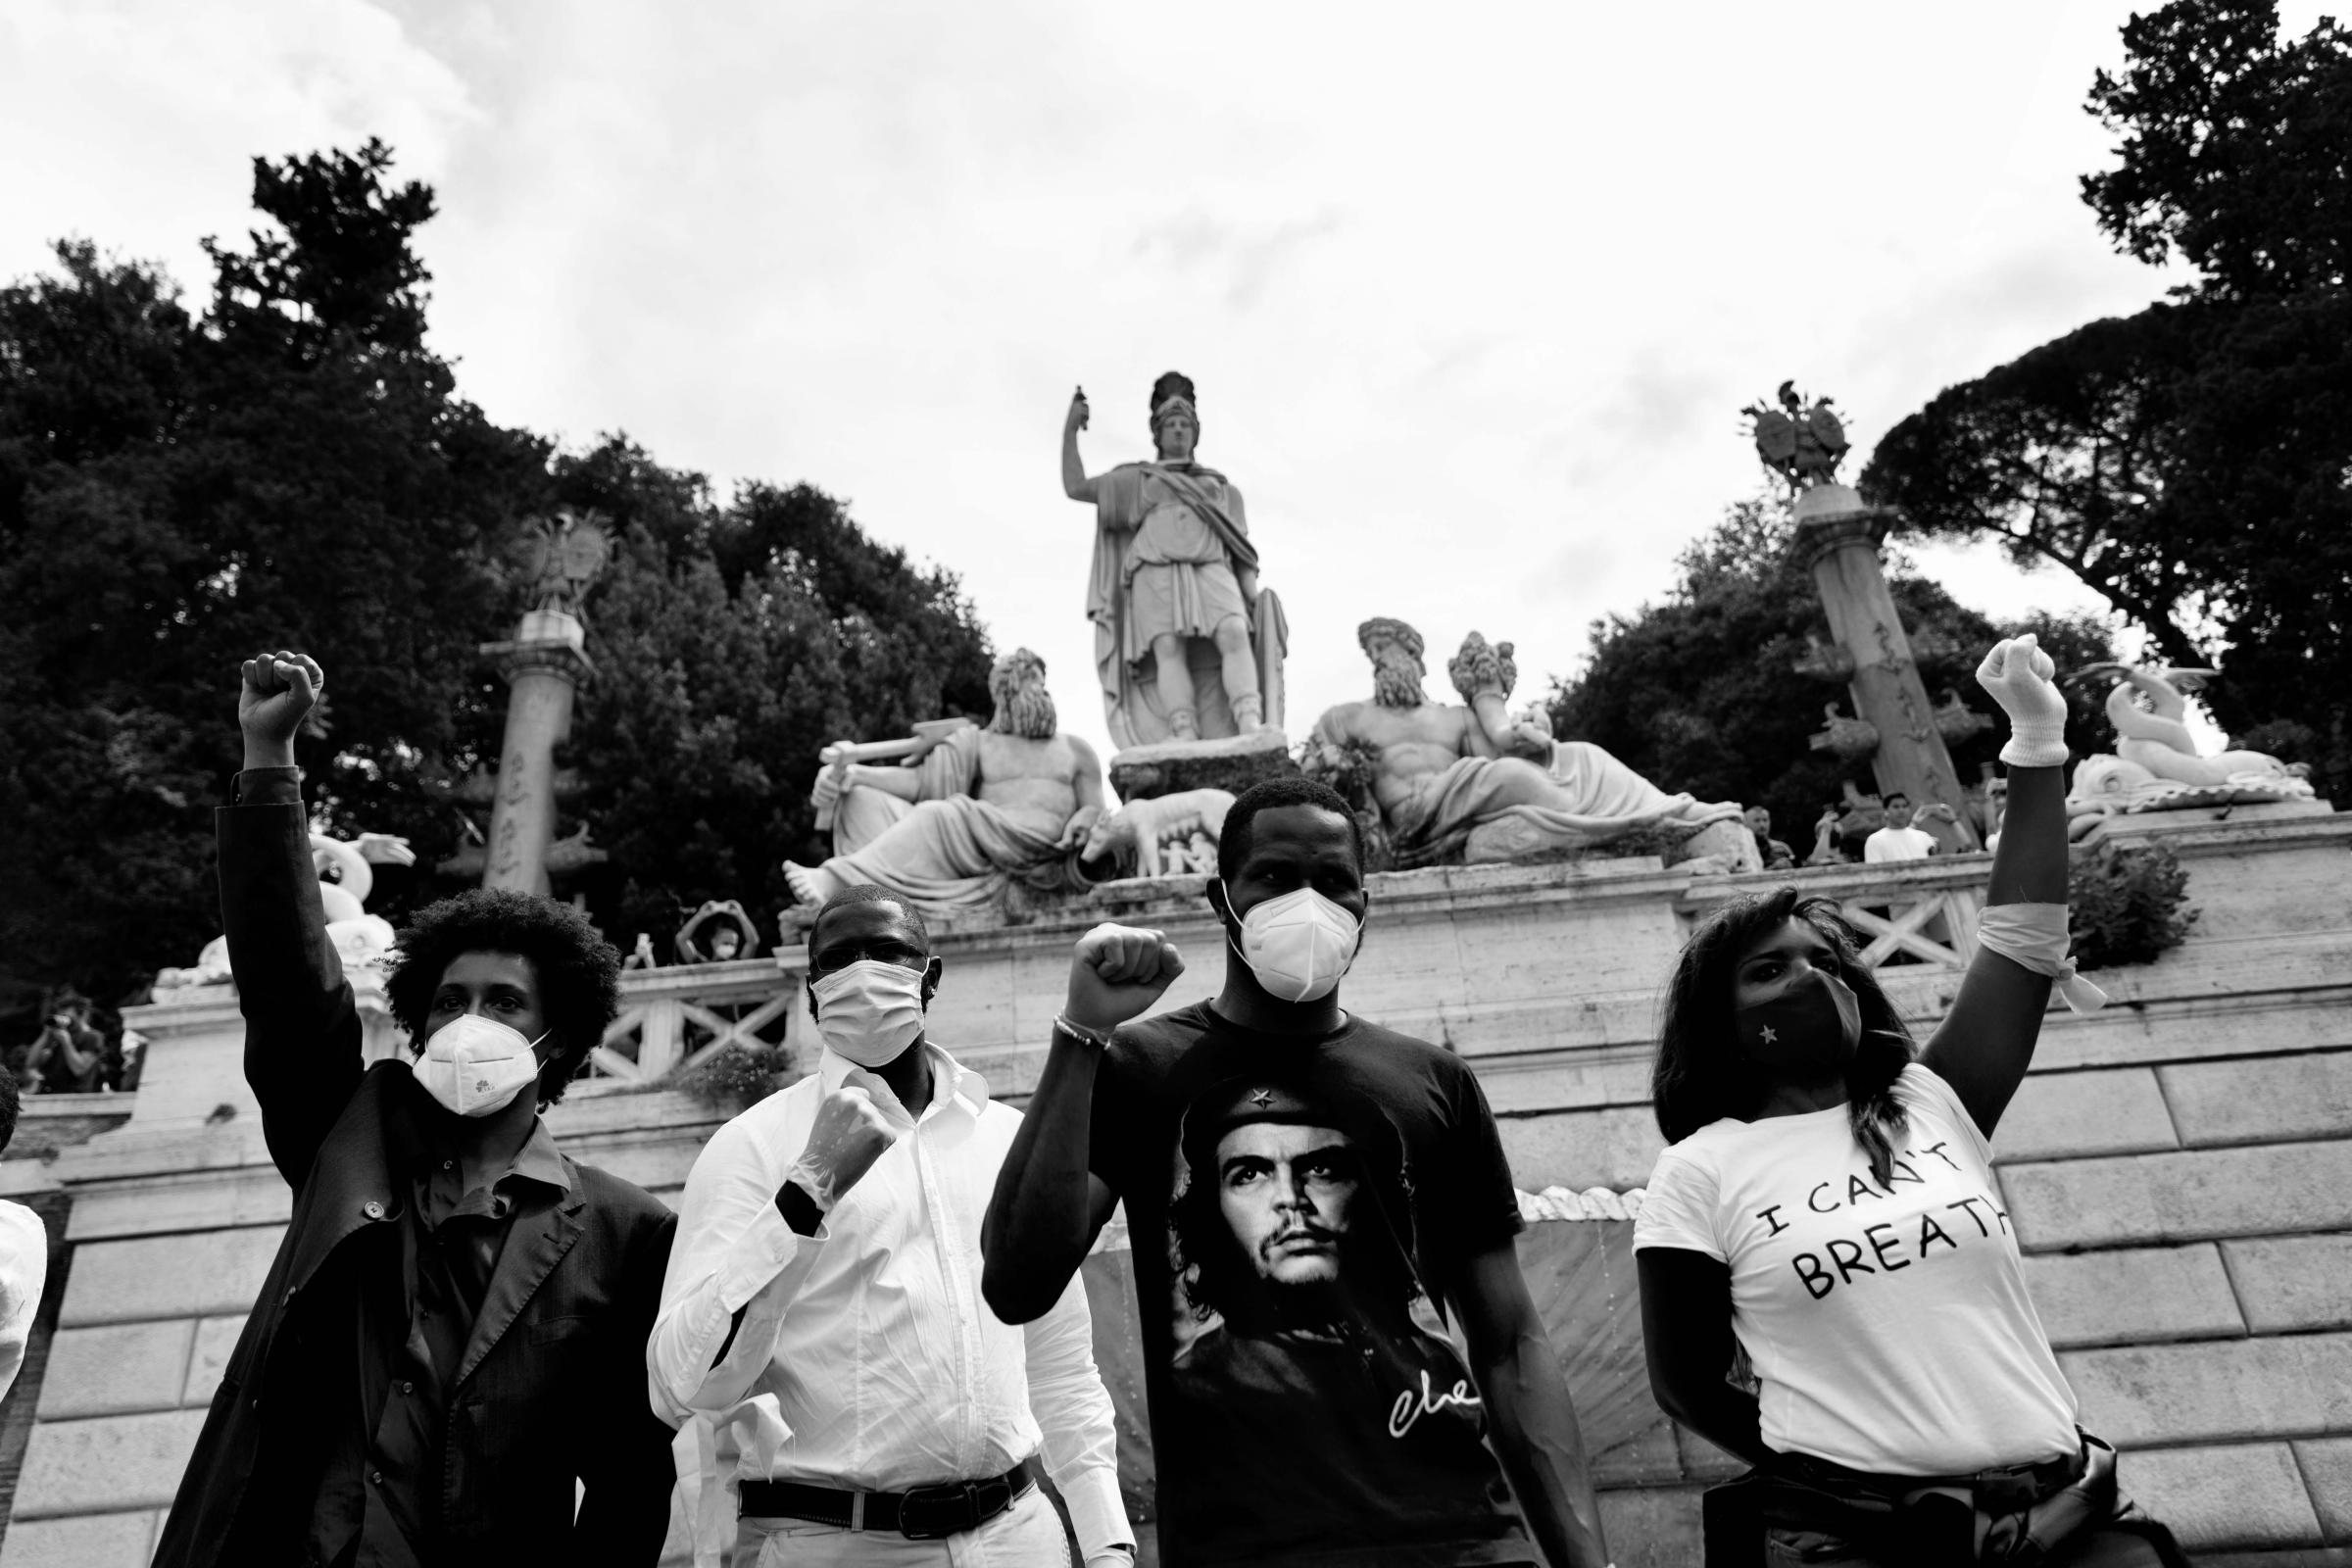 A Year Of Ordinary Covid - A group of people durign the anti-racist protest in Roma...